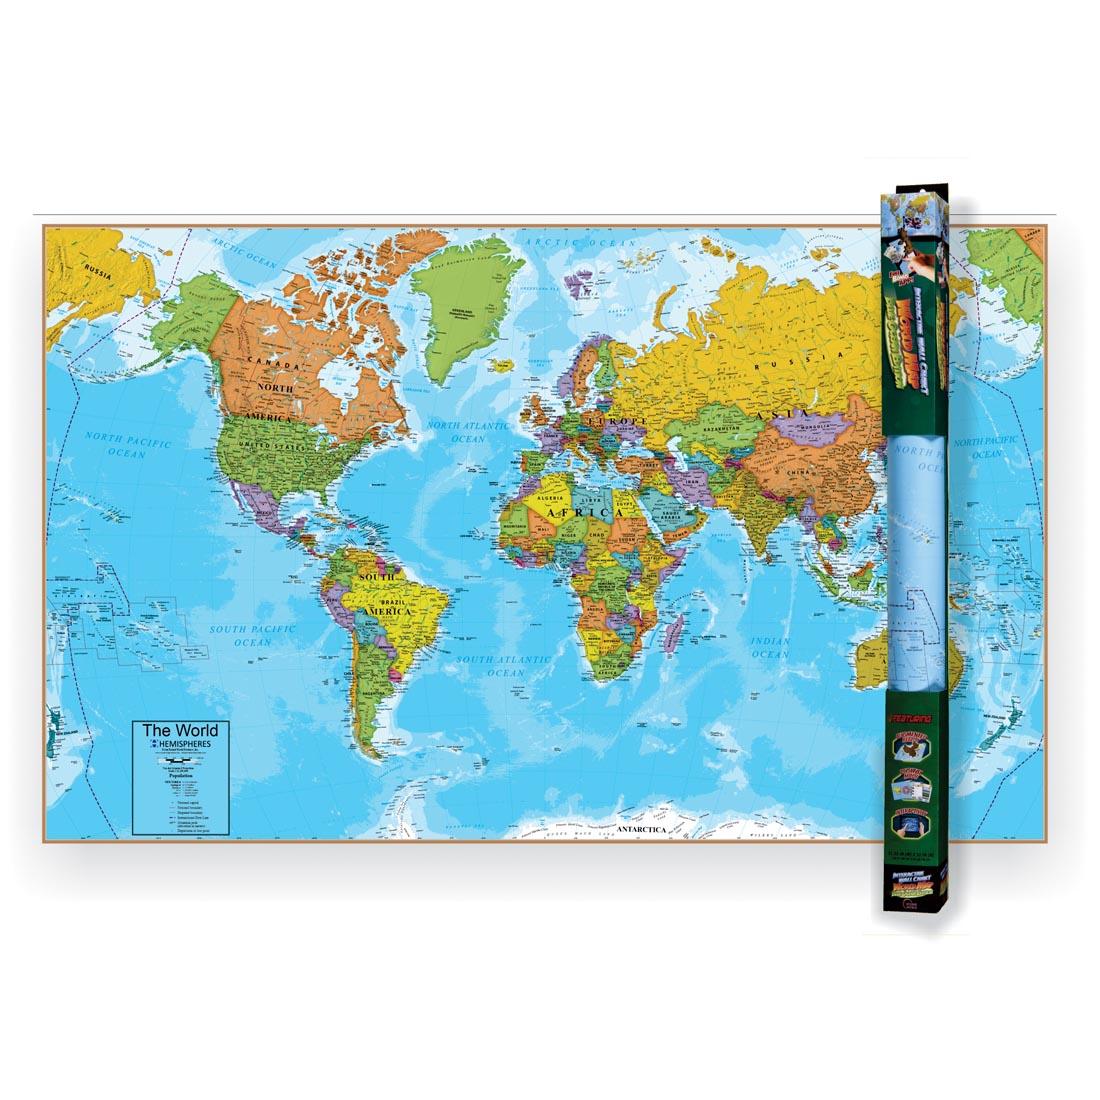 World Interactive Wall Chart by Round World Products shown both flat and rolled into its package